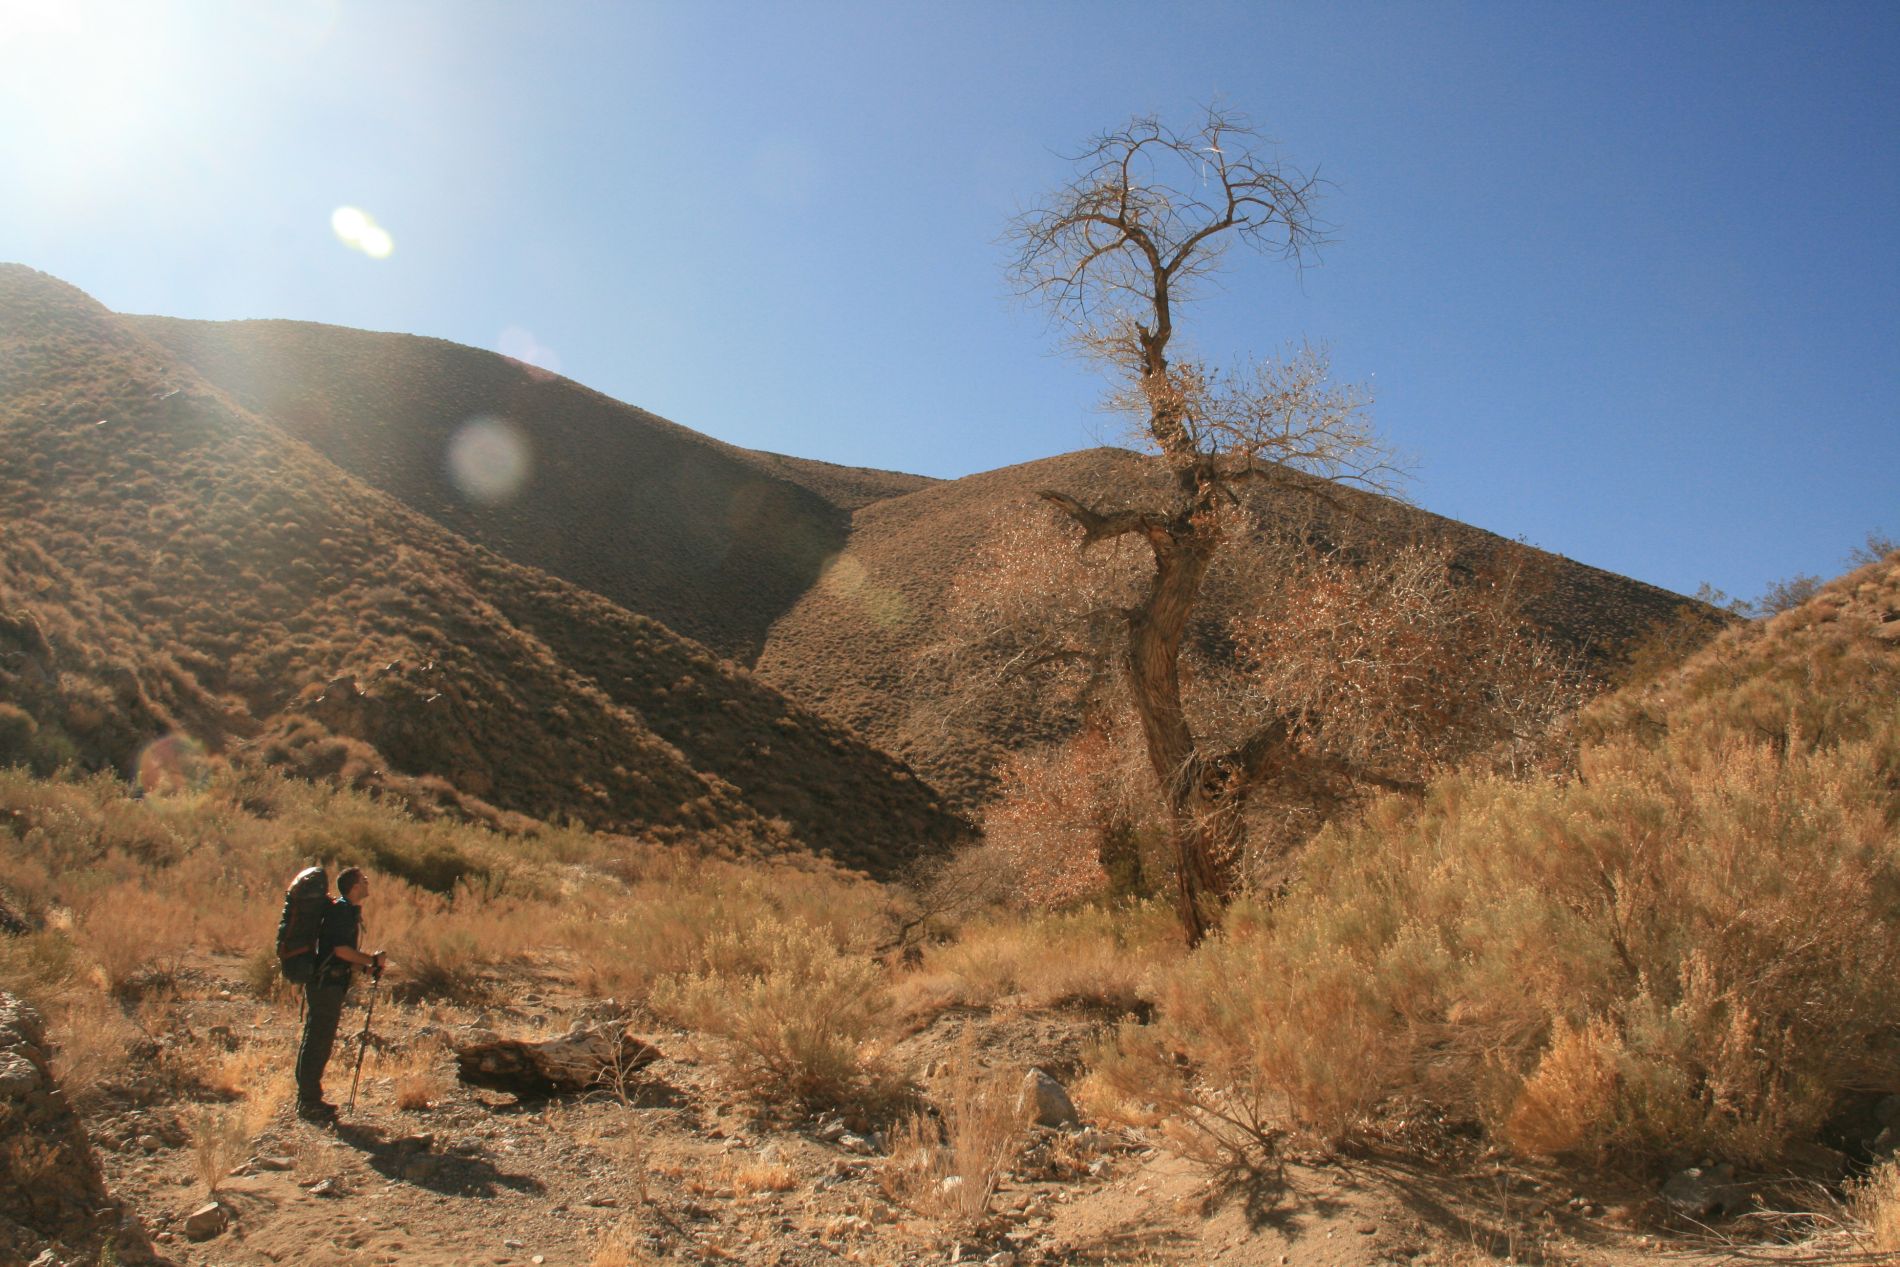 A hiker looks at a Cottonwood tree in a small oasis near Dead Horse Canyon, Death Valley, Ca.